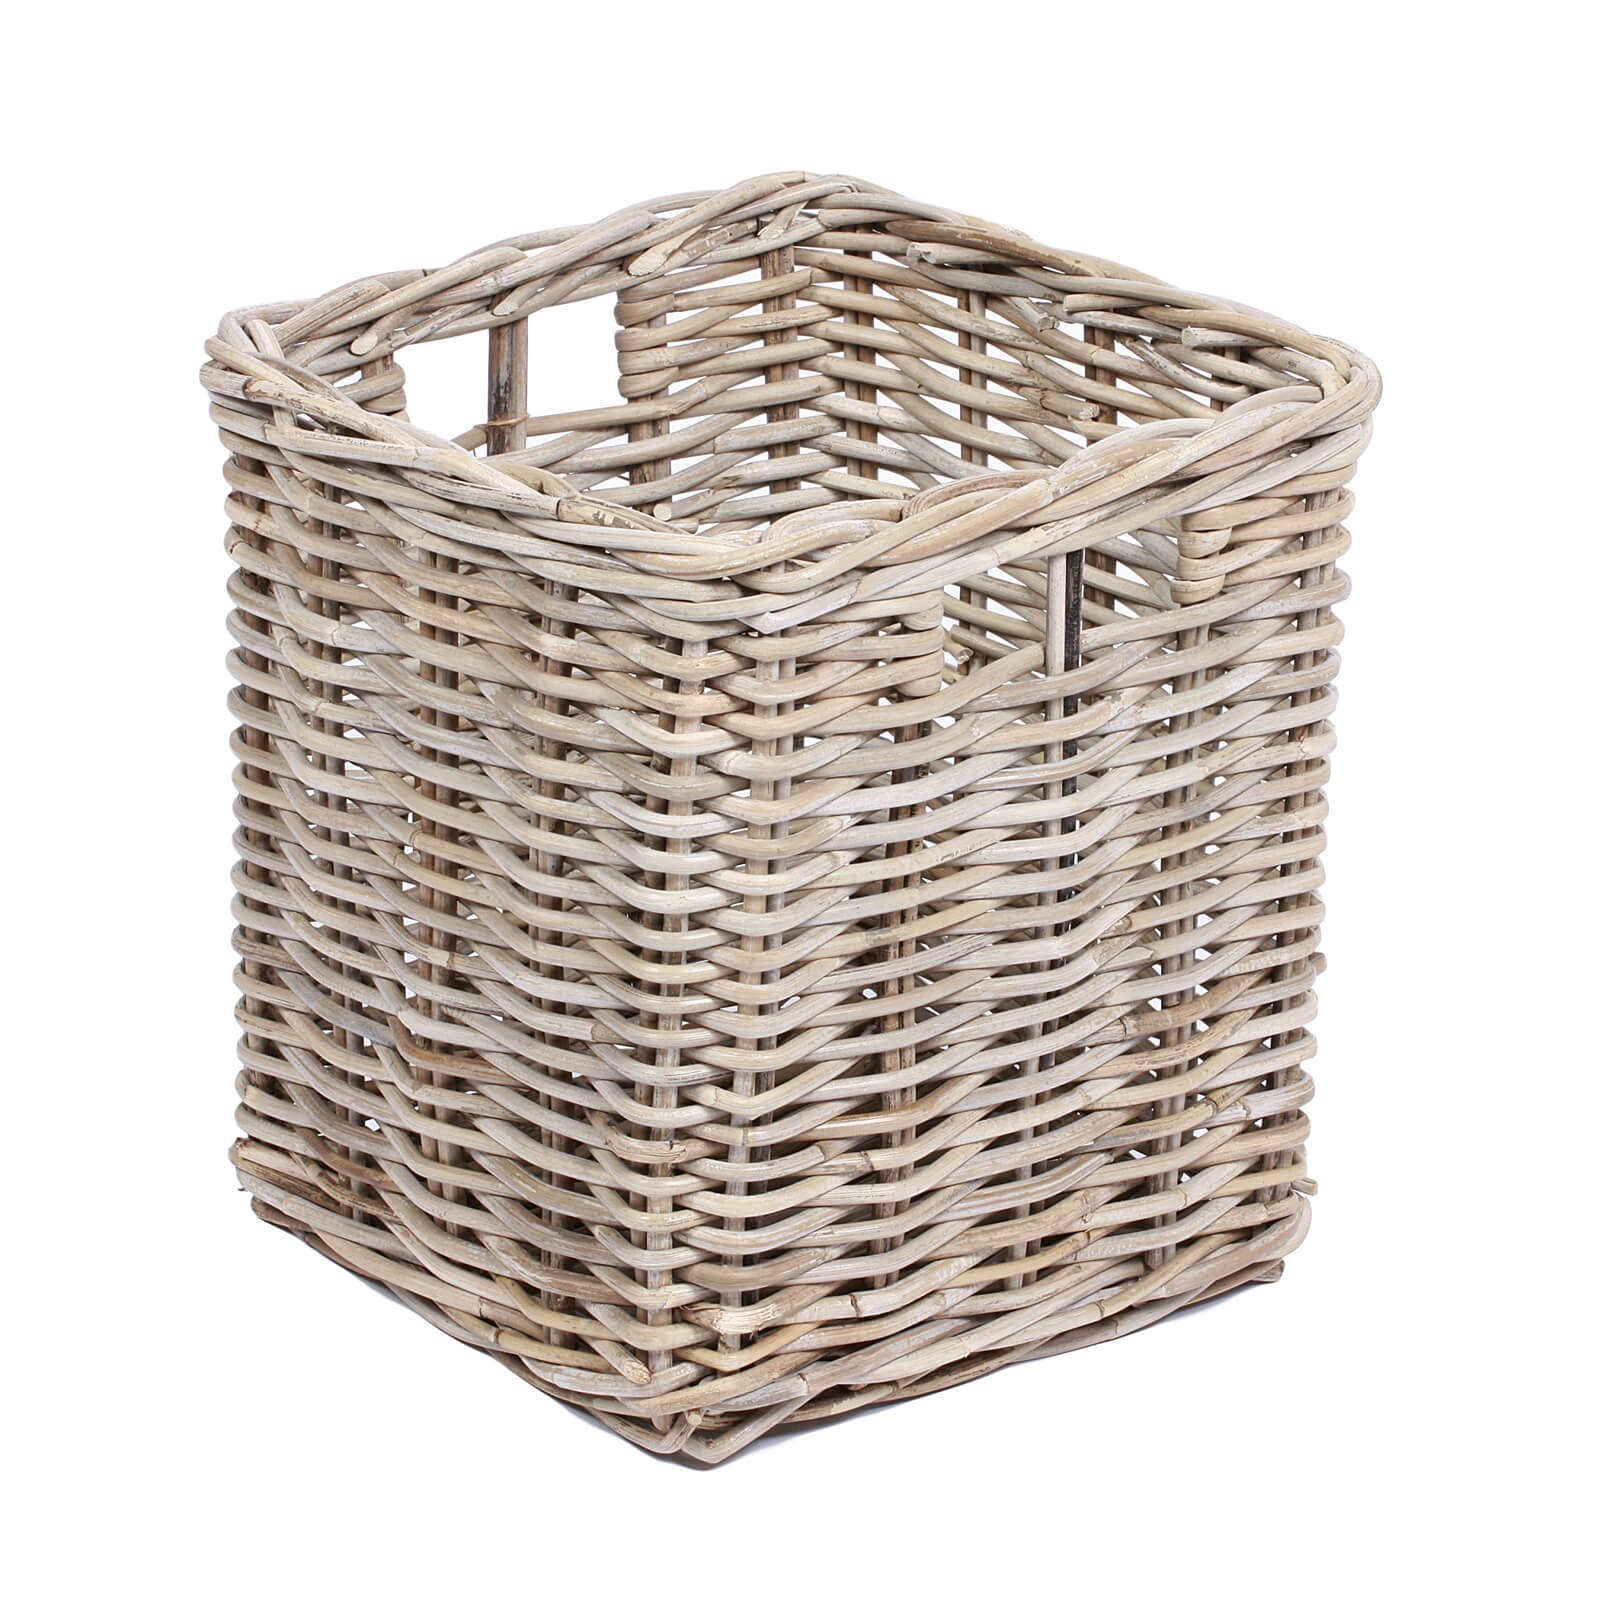 Square Wicker Basket with Hole Handles